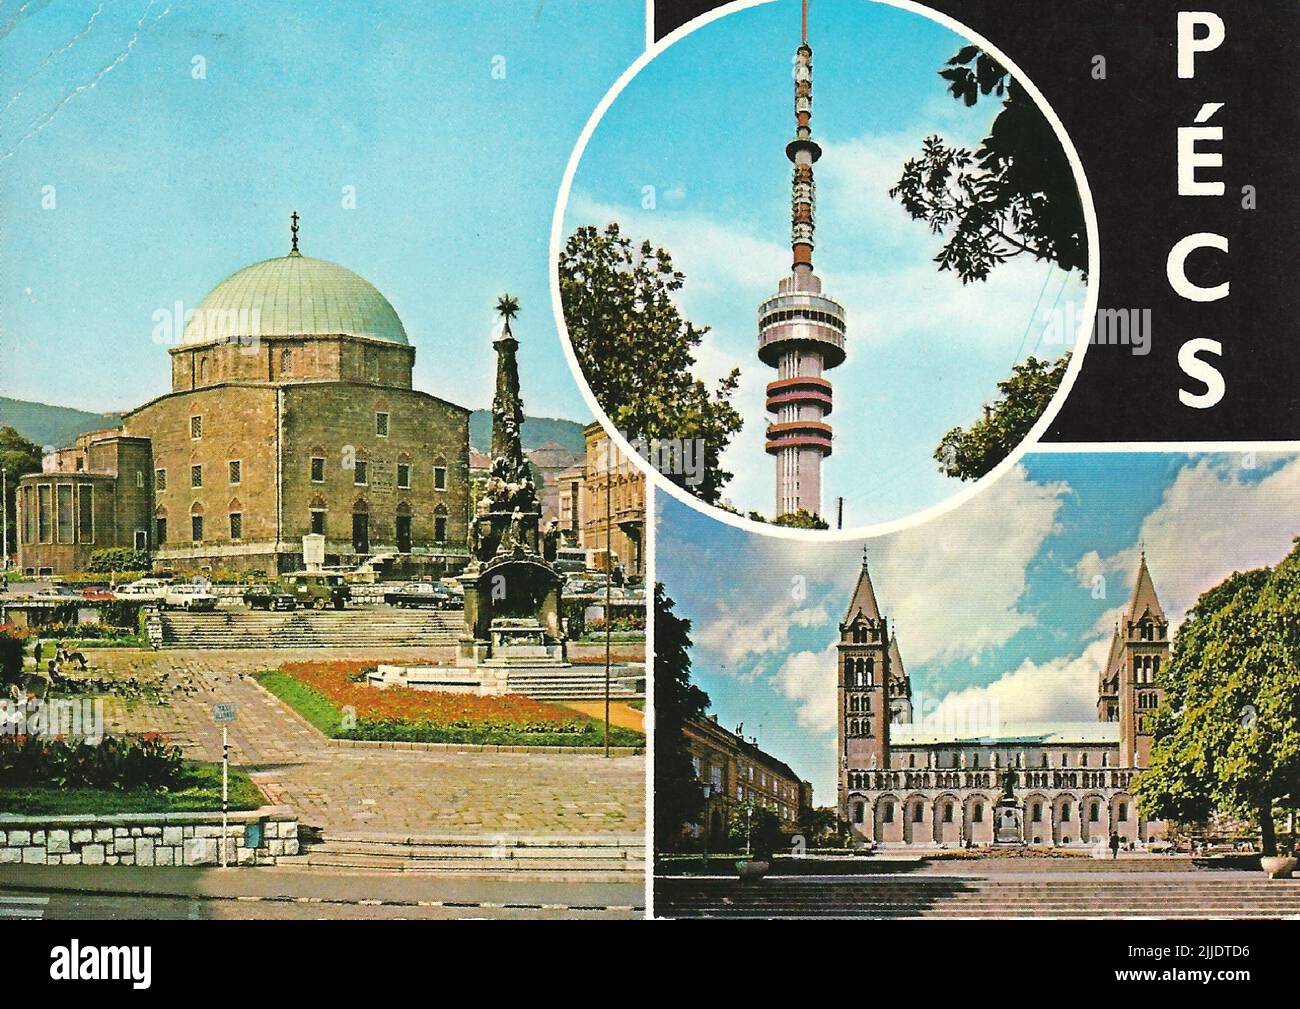 Pécs - Mosaic. Postcard of the sights of Pécs, including the Széchenyi Square, the TV tower and the Cathedral. The Local History Collection of Csorba Gyz Könyvtár Library has been collecting photos and postcards related to Baranya County since January 1966. According to the data updated on 1st February 2016, the collection consists of 11,565 copies. As the result of the digitisation project that started in 2012, the Collection includes about 59,000 black-and-white and coloured records of different sizes and types, which are searchable through the electronic catalogue. The famous postcard colle Stock Photo